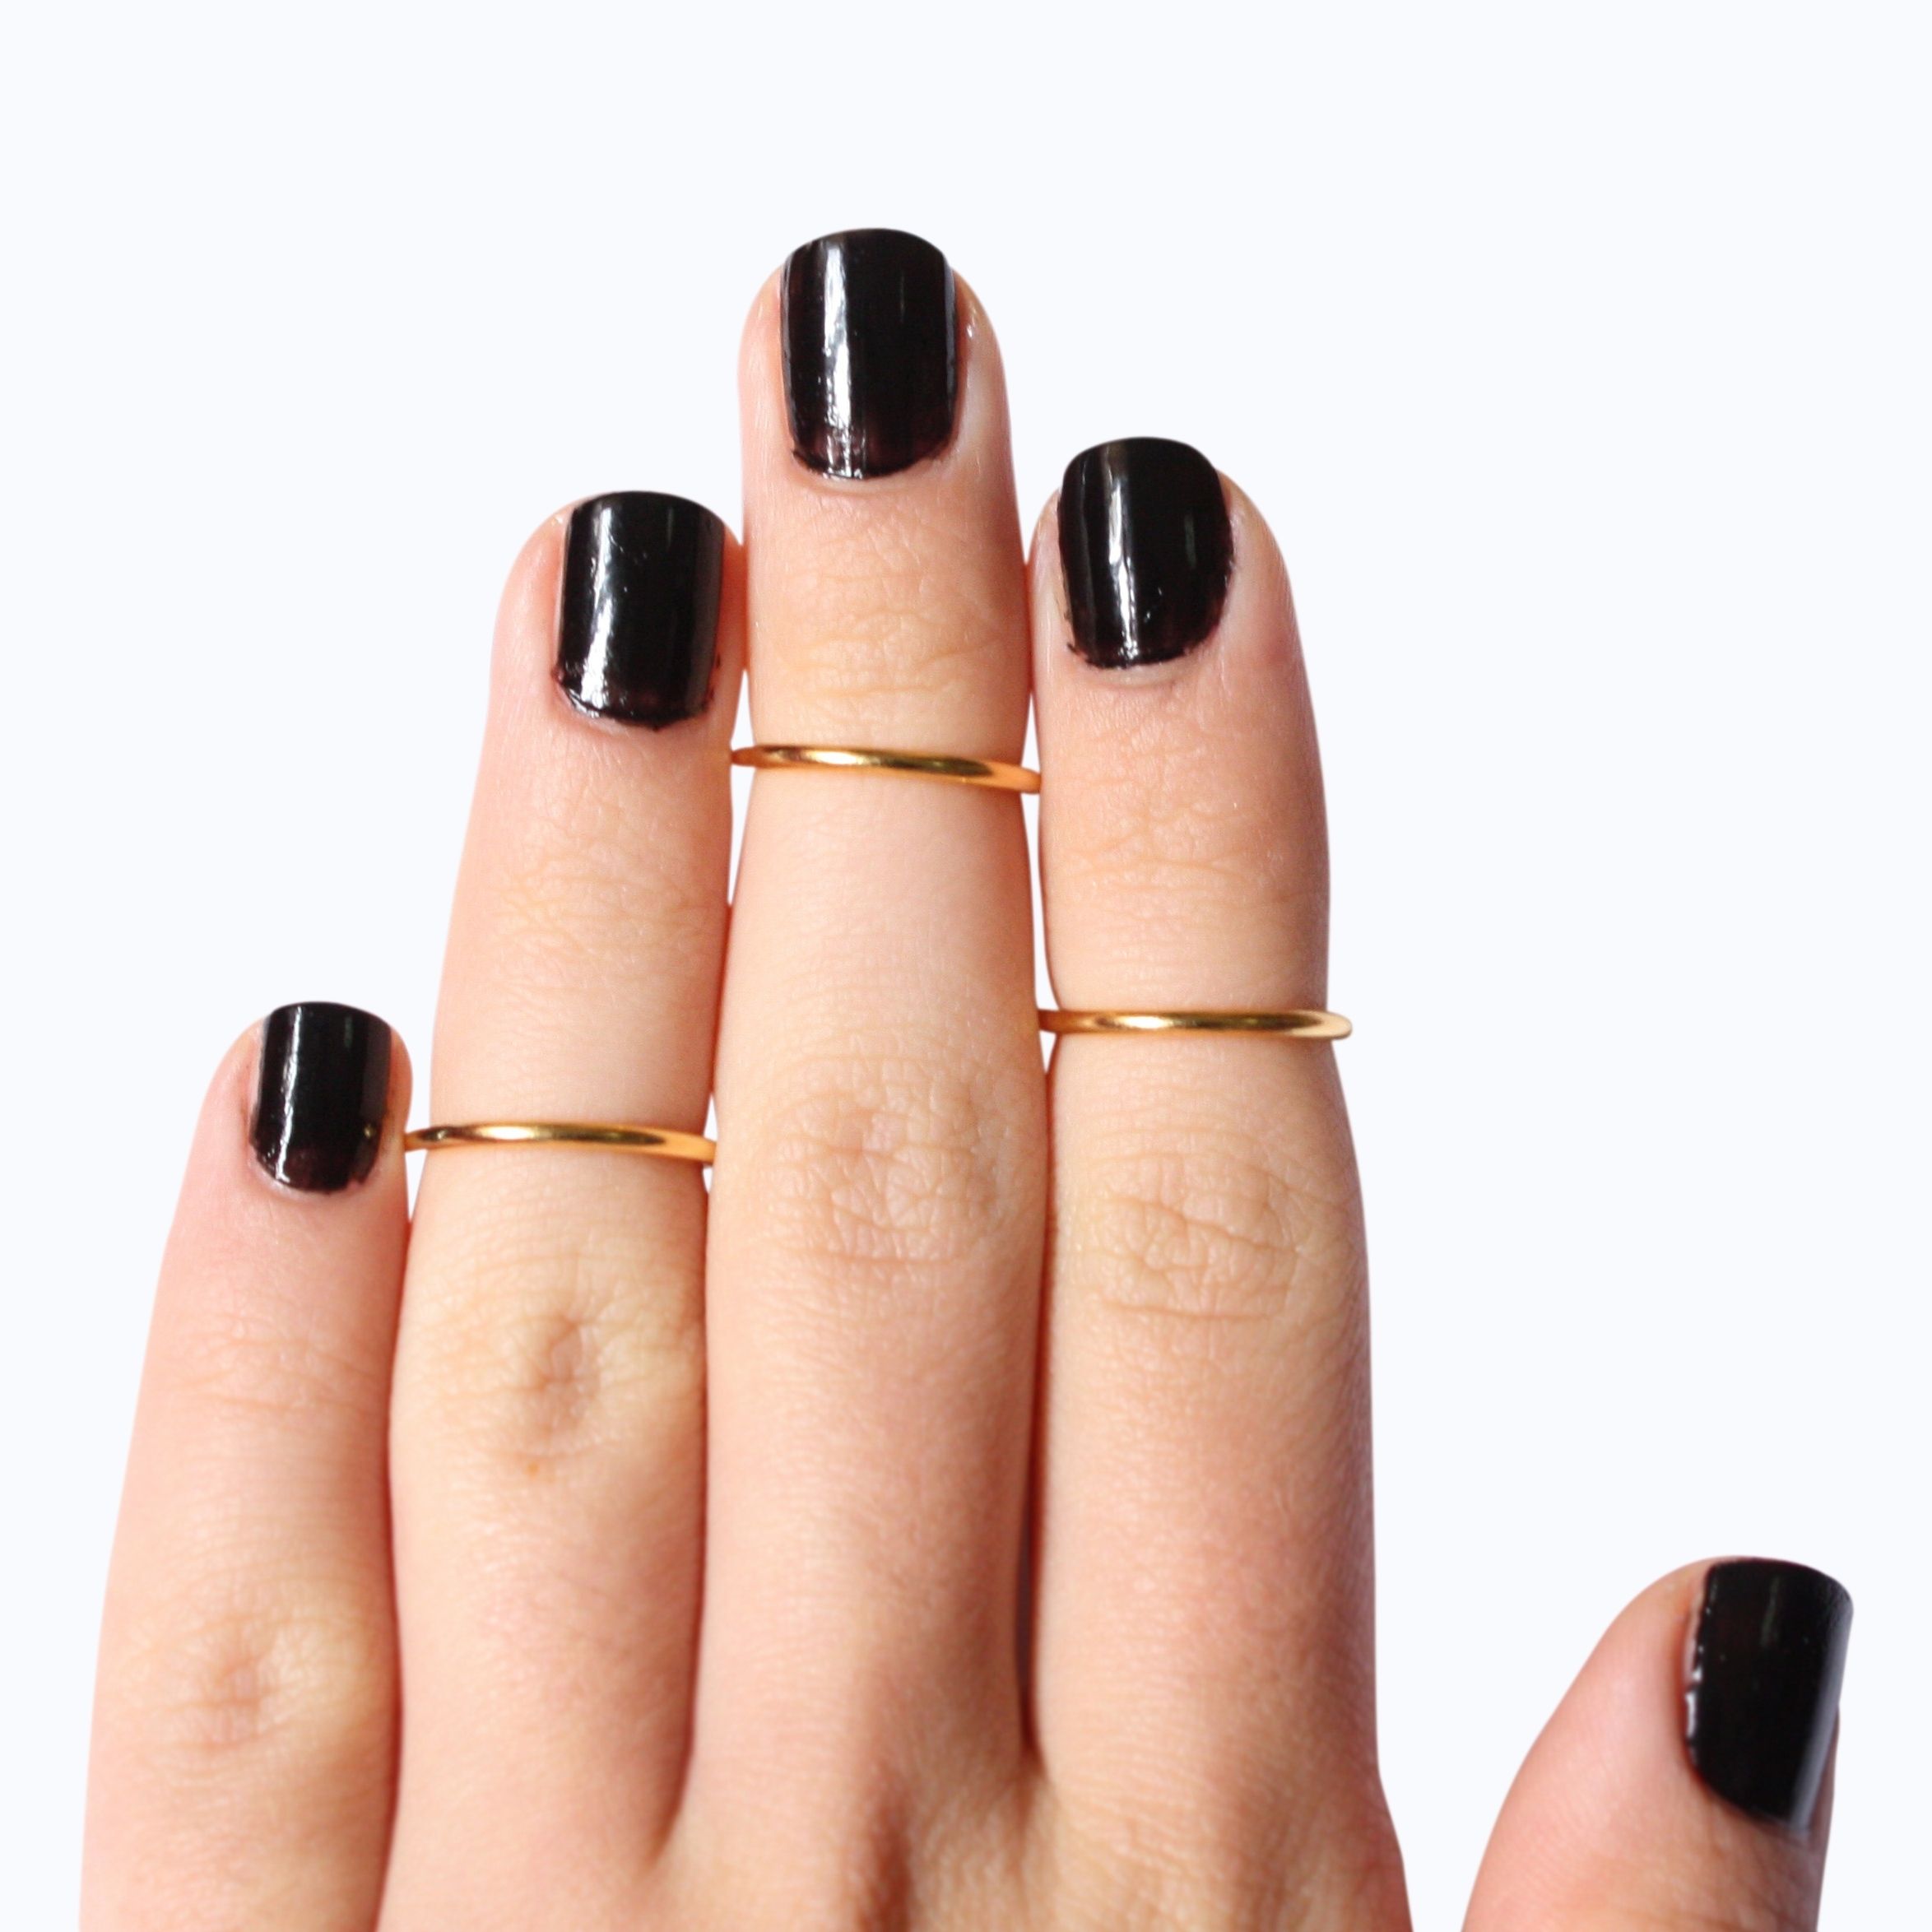 Gold Toe Rings | Midi Rings For Most Recent Real Gold Toe Rings (View 3 of 15)